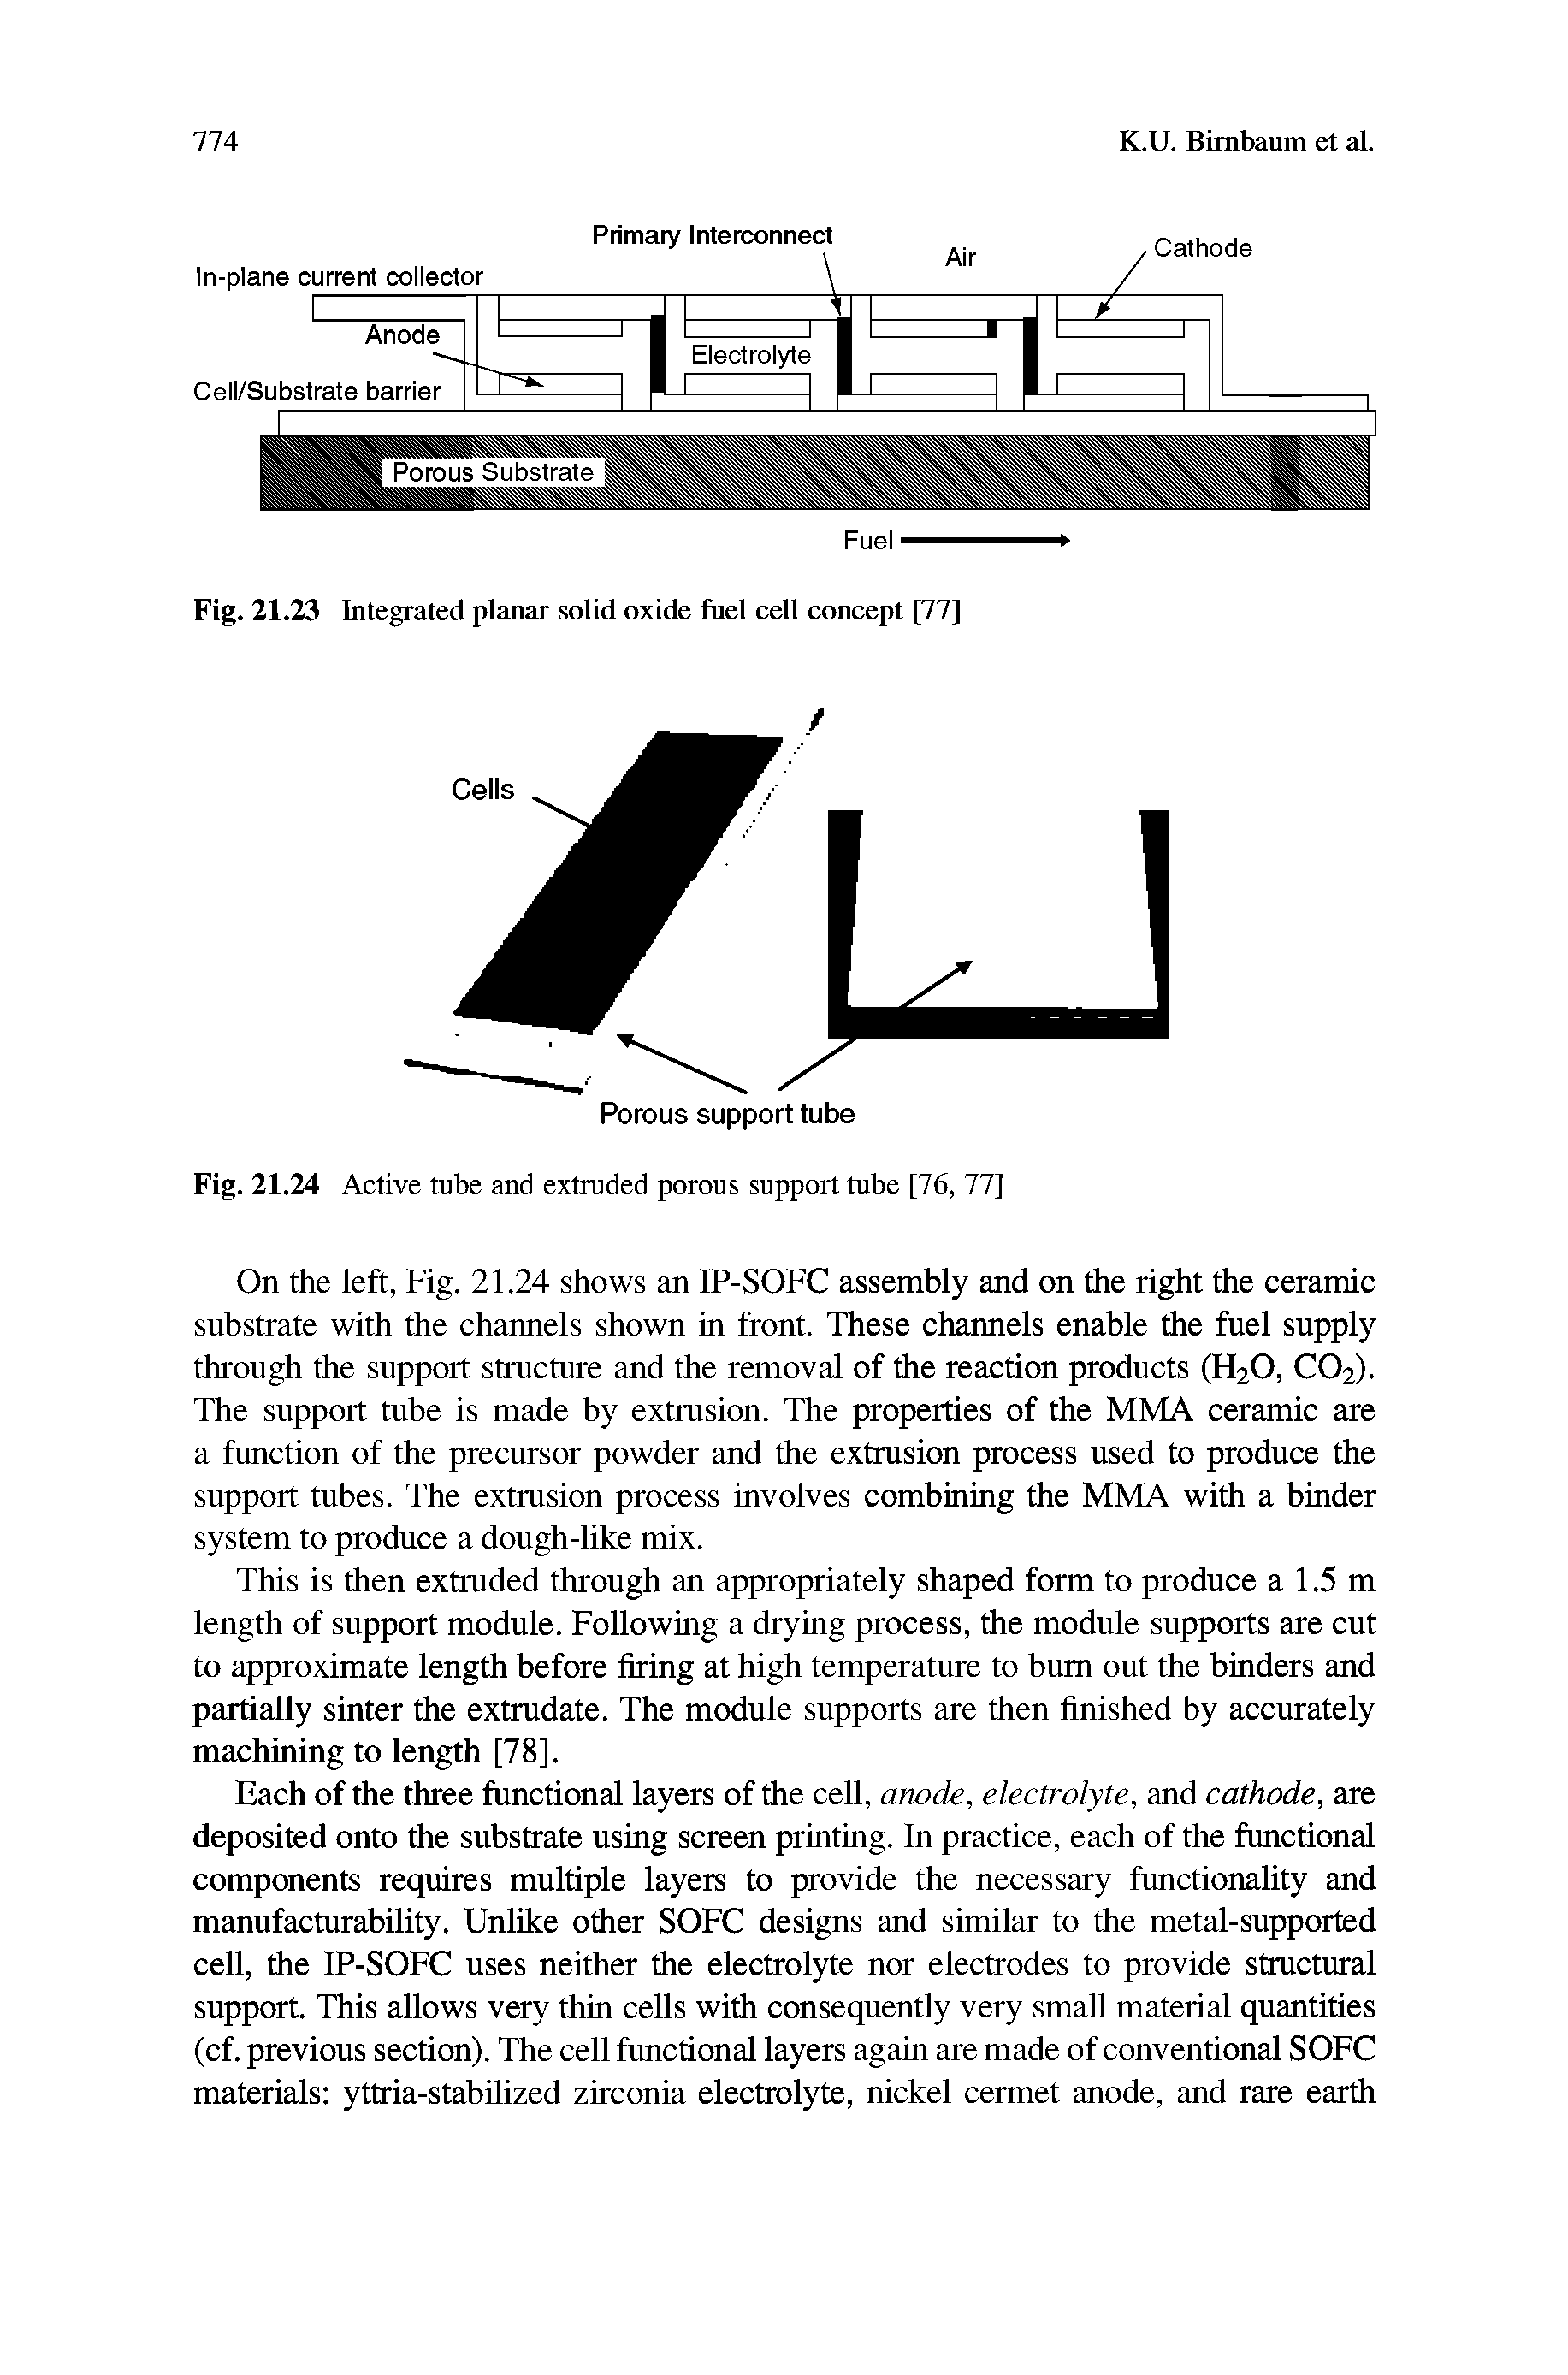 Fig. 21.24 Active tube and extruded porous support tube [76, 77]...